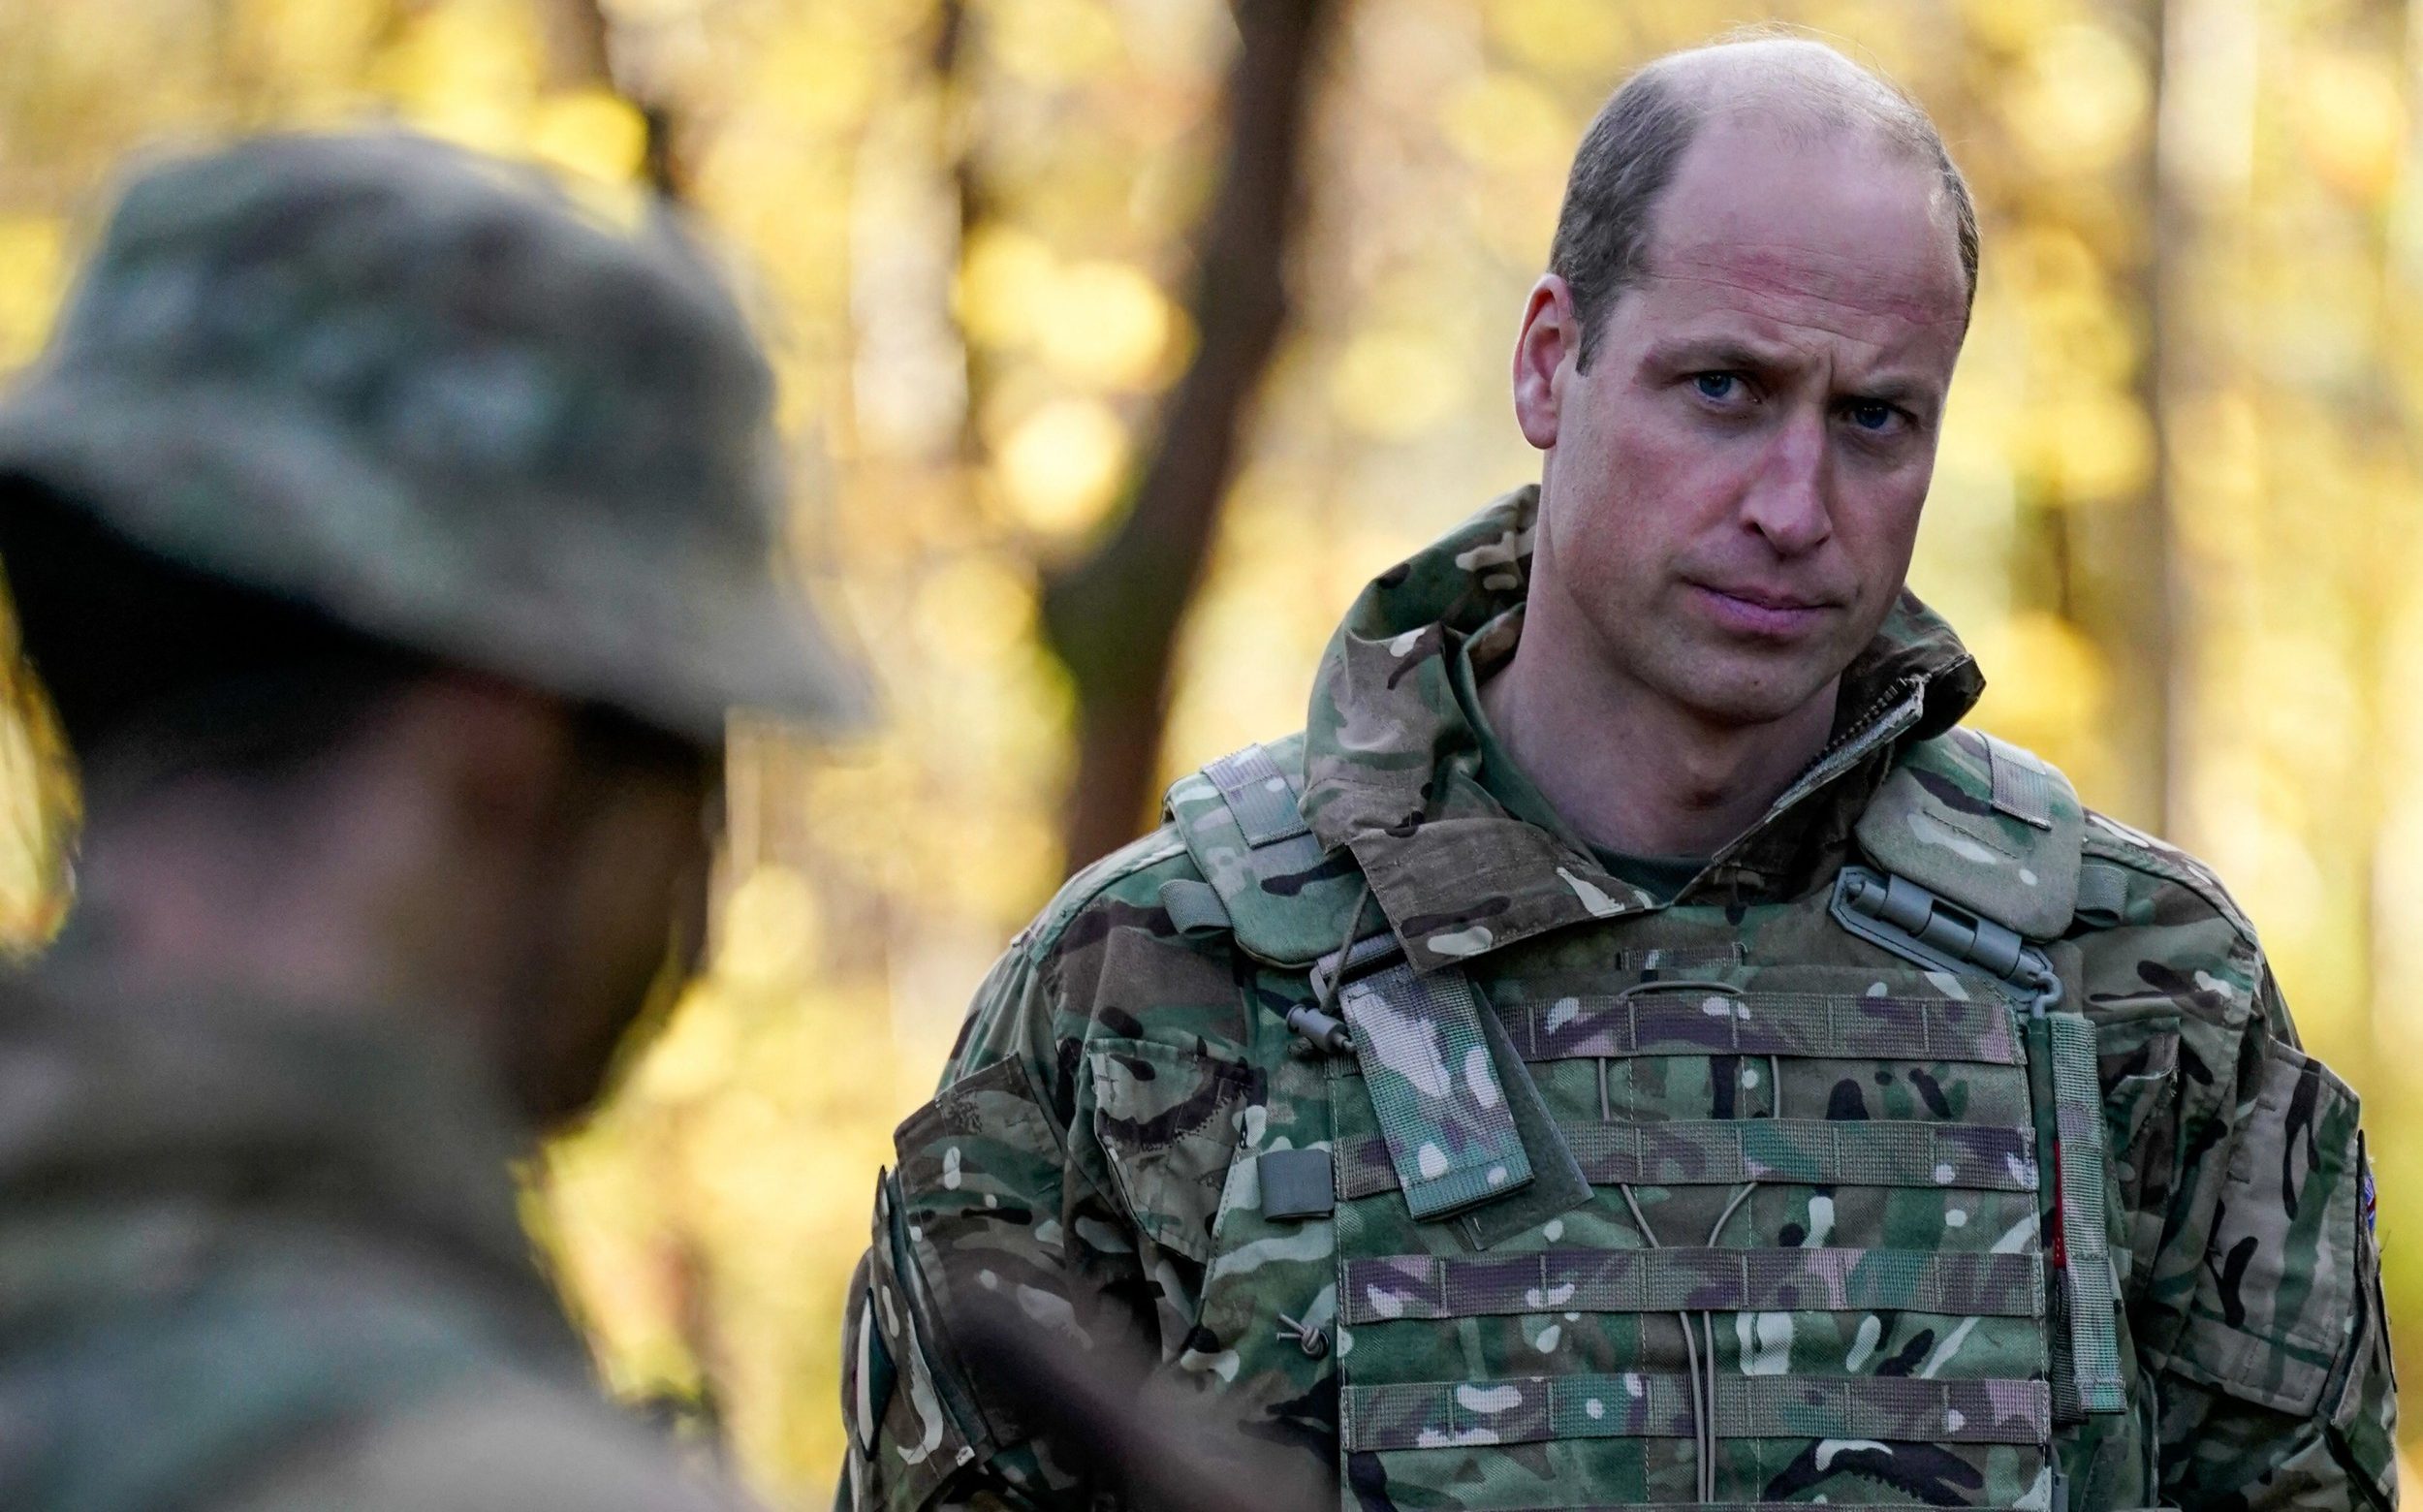 prince william tells armed forces families bereaved by suicide ‘you are not alone’